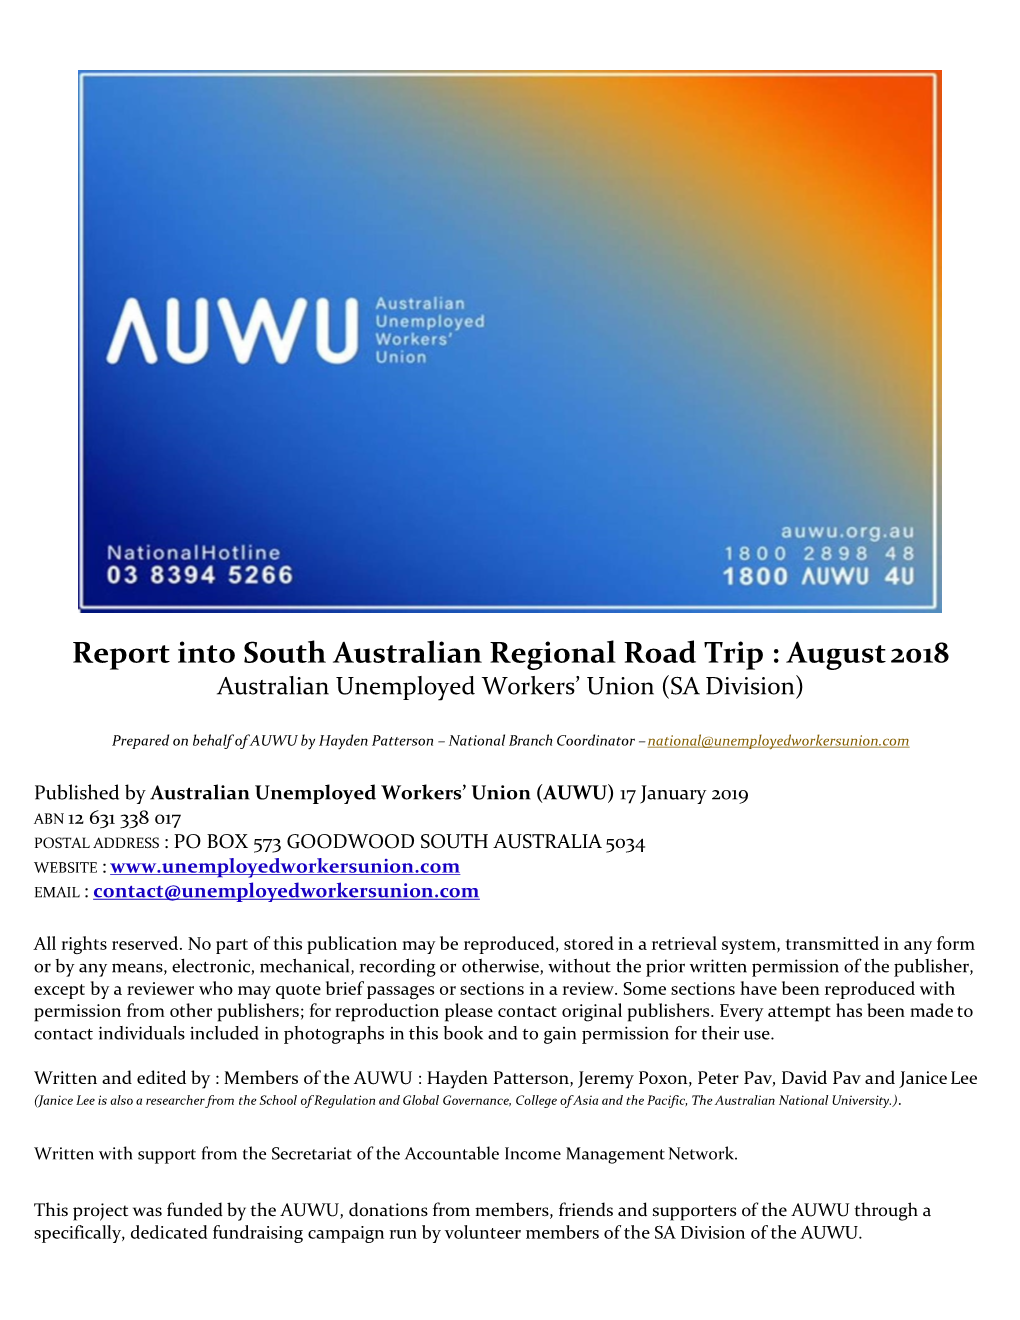 Report Into South Australian Regional Road Trip : August 2018 Australian Unemployed Workers’ Union (SA Division)